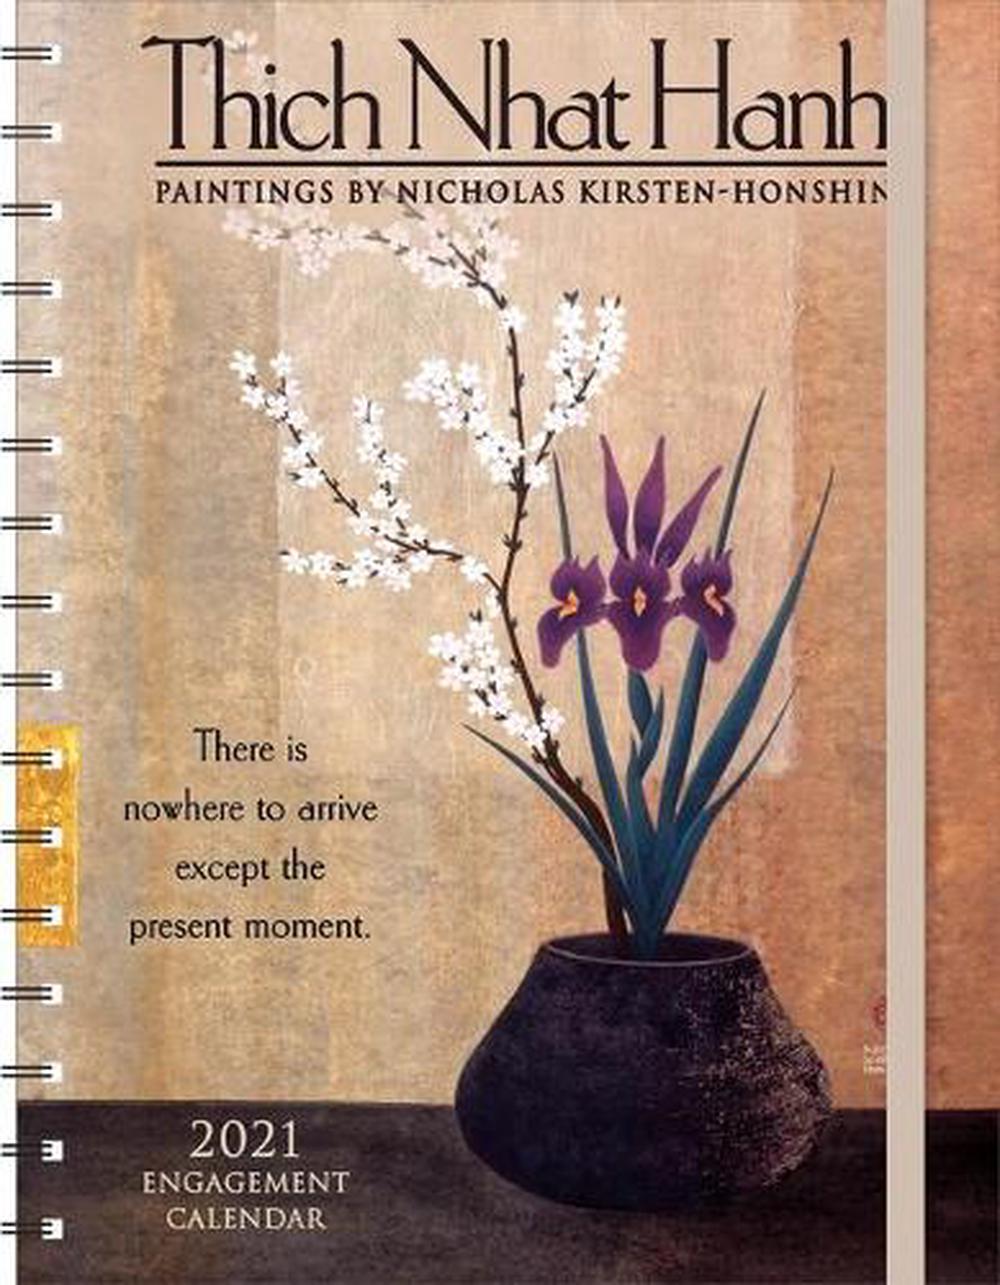 thich-nhat-hanh-2021-engagement-calendar-paintings-by-nicholas-kirsten-honshin-by-thich-nhat